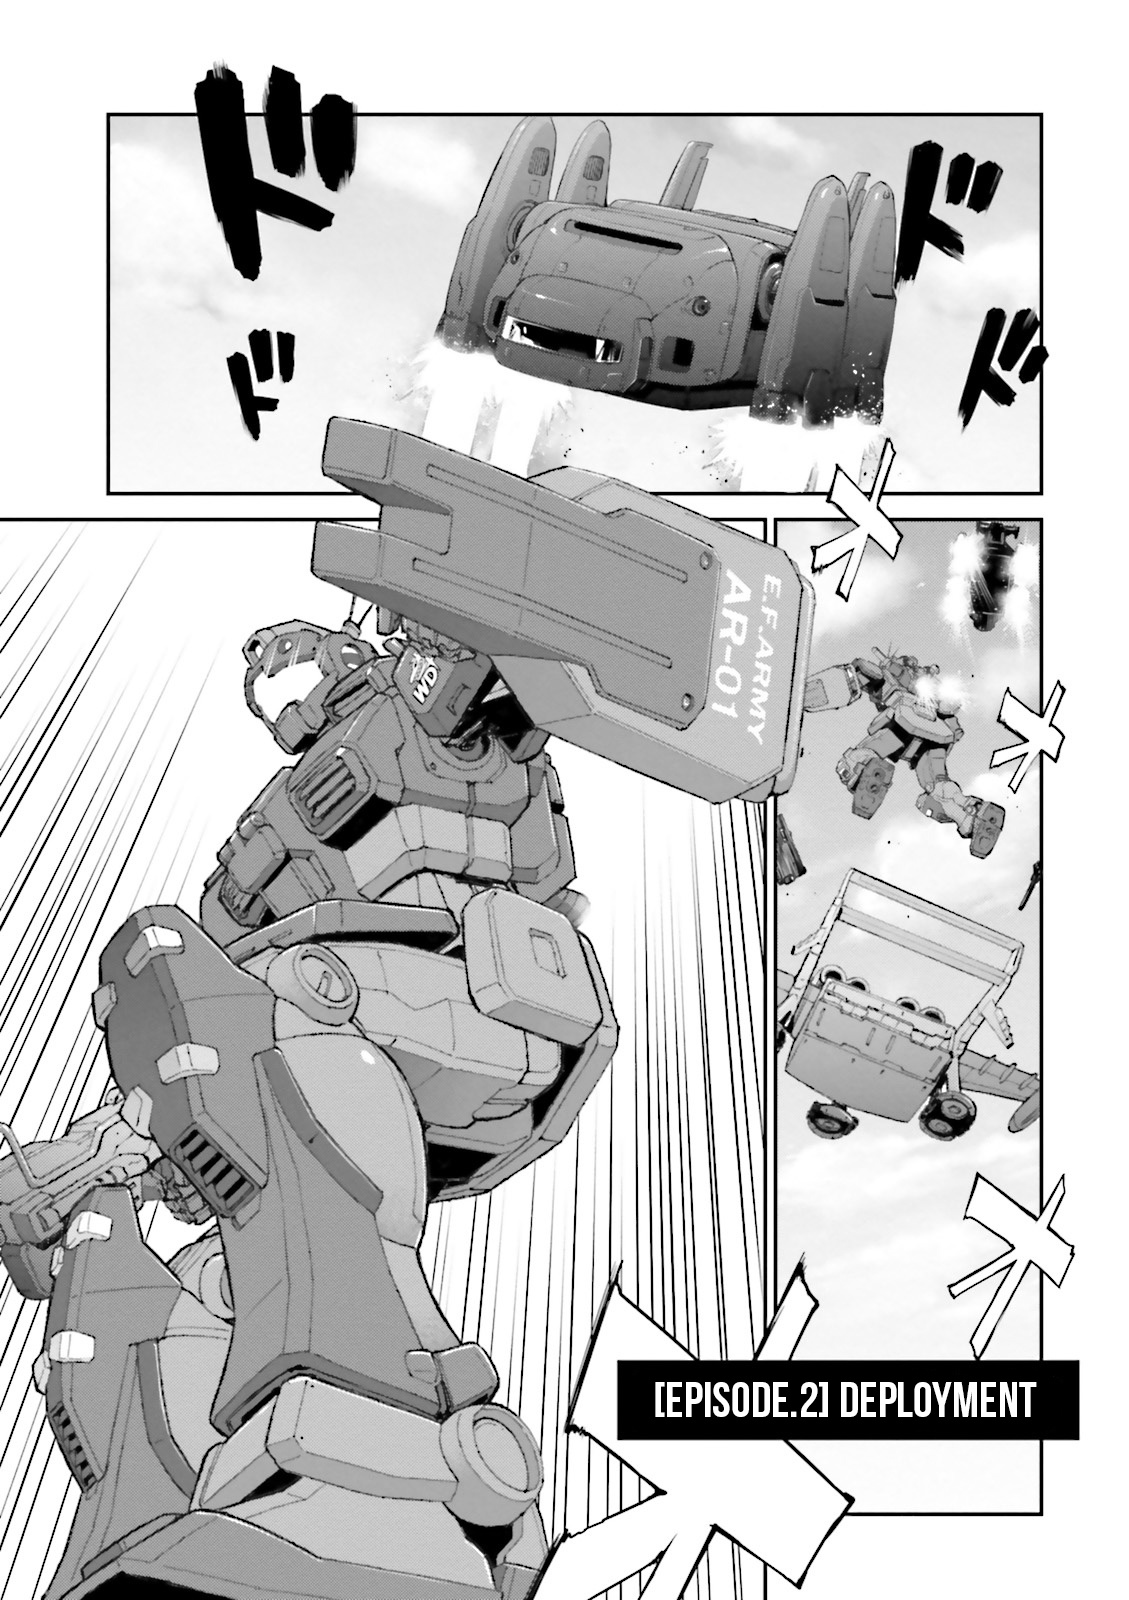 Mobile Suit Gundam Ground Zero - Rise From The Ashes Vol.1 Chapter 2: Deployment - Picture 2